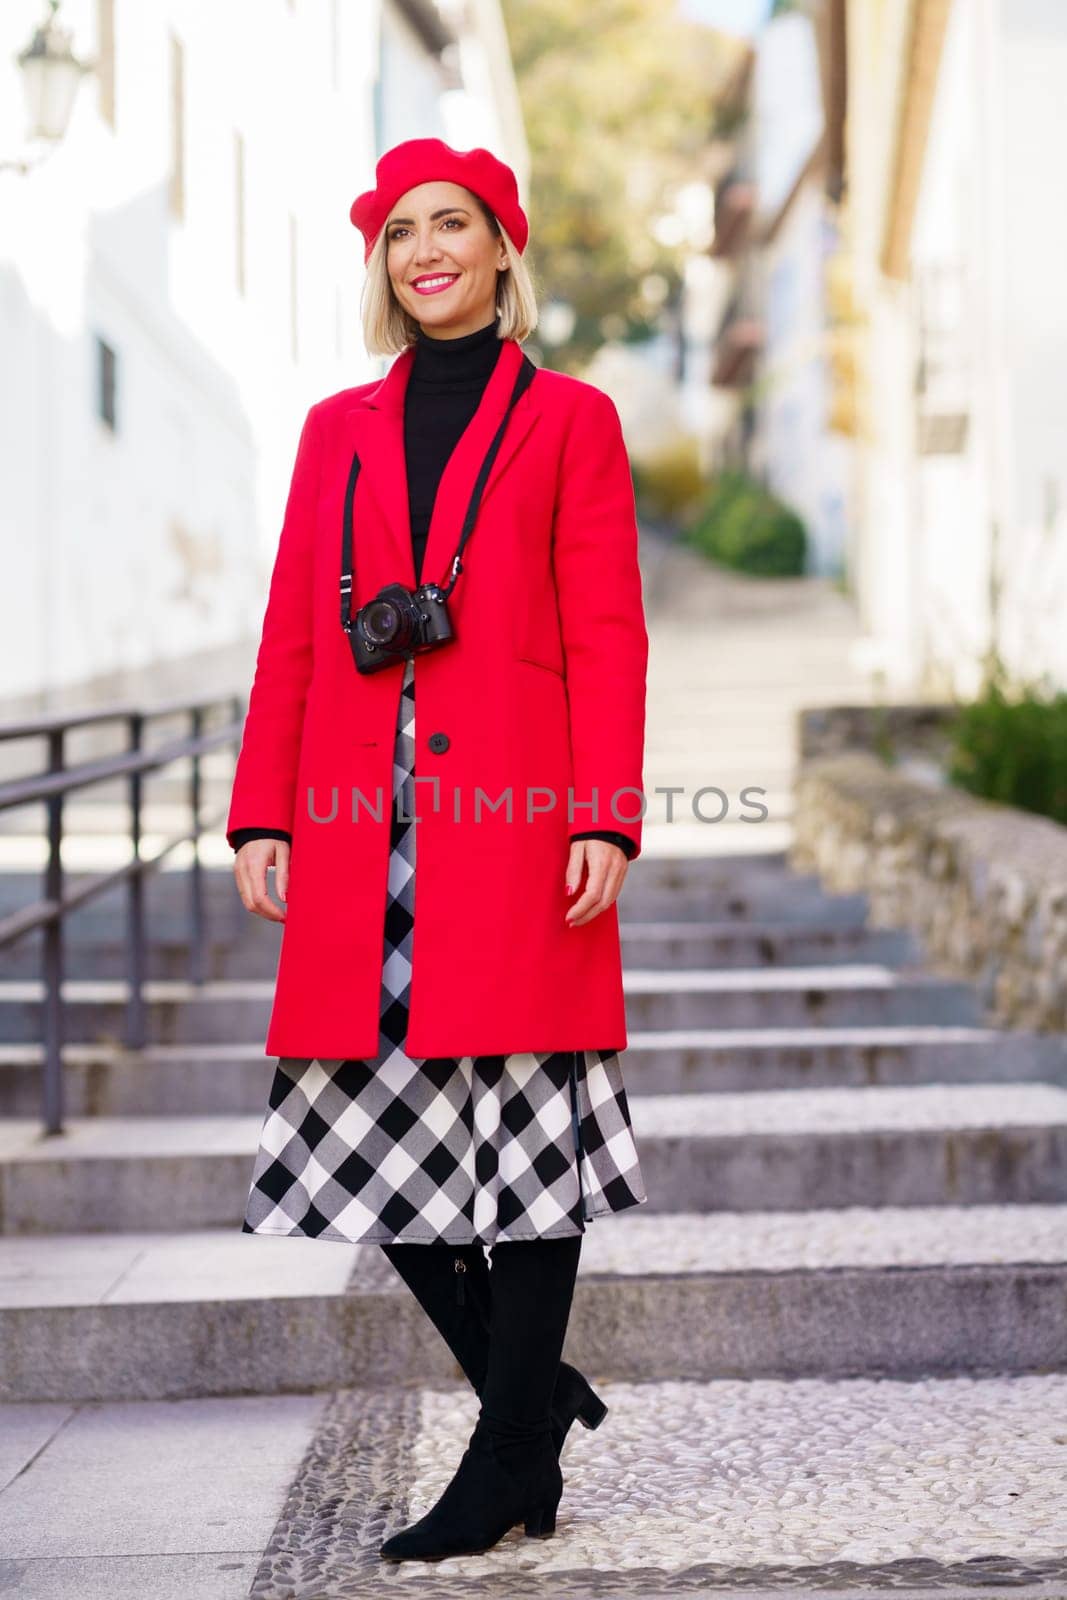 Stylish woman in red coat standing on city street in sunlight by javiindy